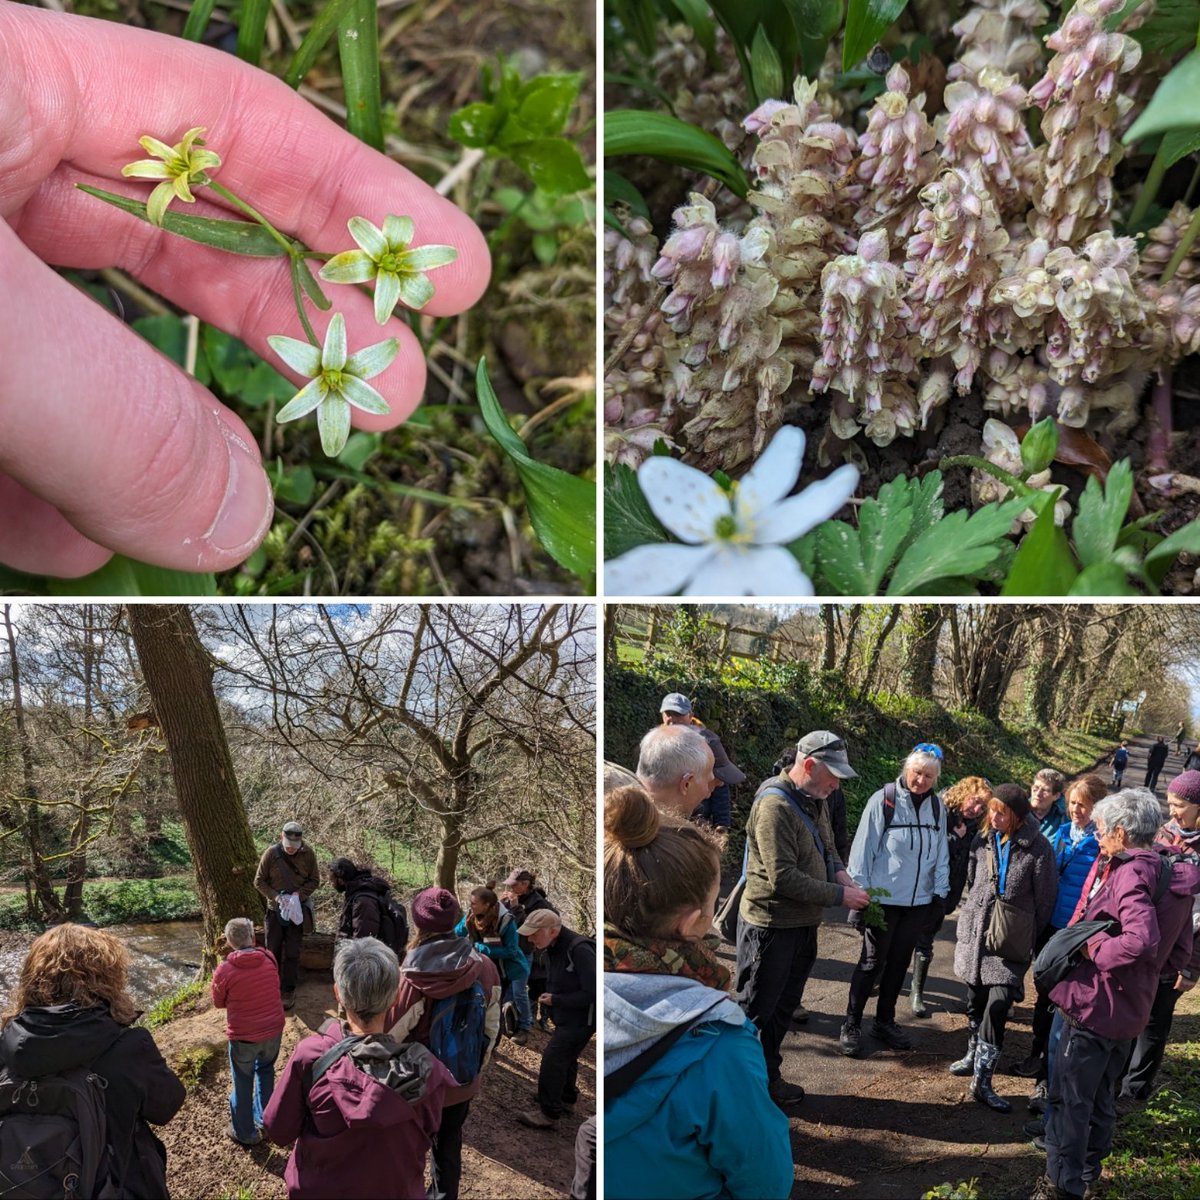 Exquisite weather for the next installment of our @NENature_ 'Botanists Year' course. An amazing array of woodland flowers on display at Morpeth including Toothwort and Yellow Star-of-Bethlehem 😁🌱 #botany #wildflowers